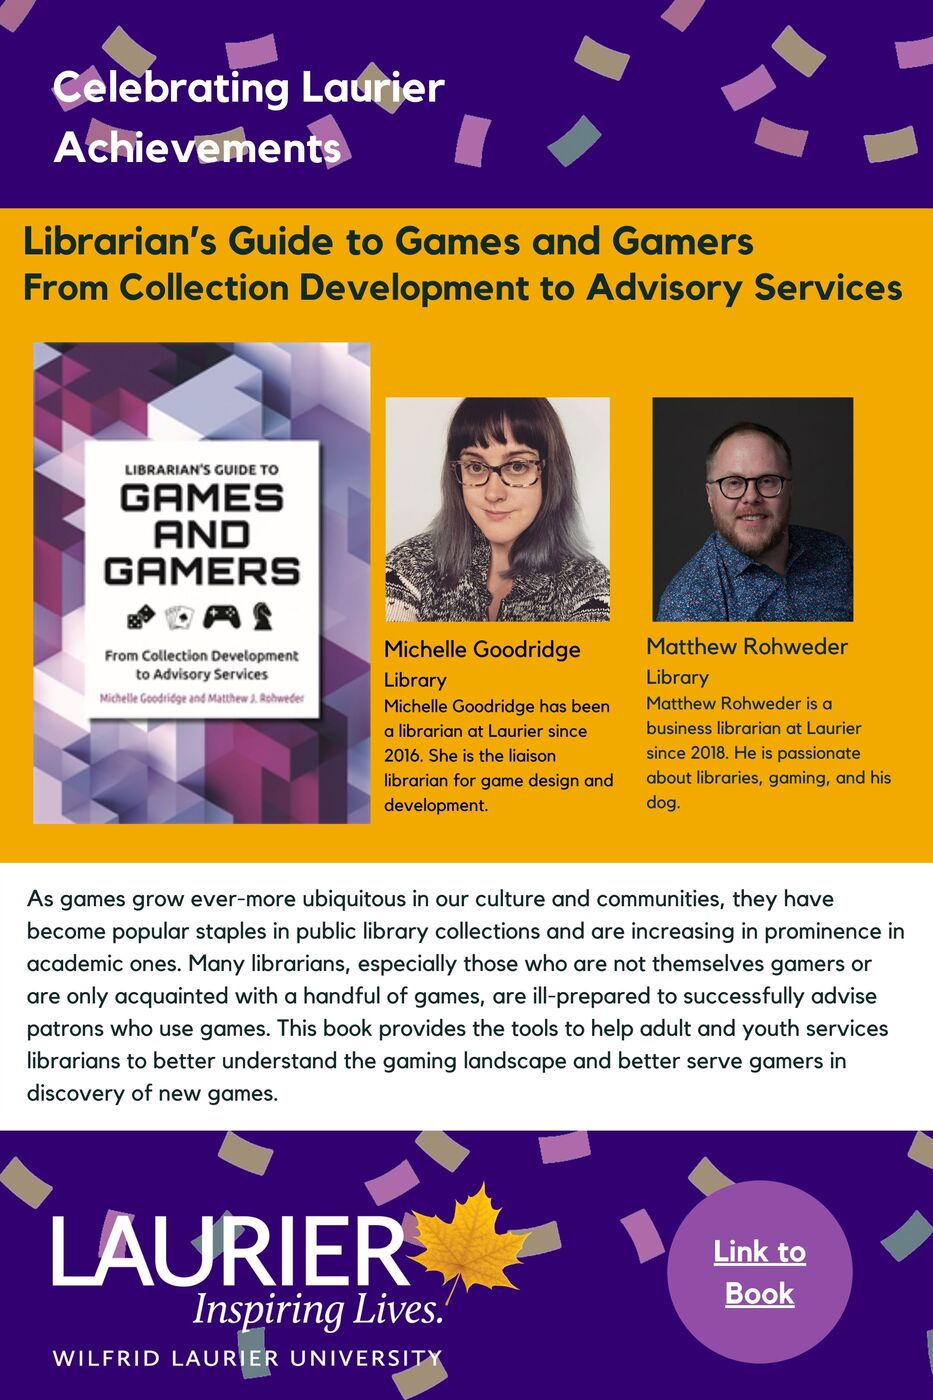 Librarian’s Guide to Games and Gamers: From Collection Development to Advisory Services promotional poster for the Celebrating Laurier Achievements program with a headshot of the book's authors, Michelle Goodridge and Matthew Rohweder. 